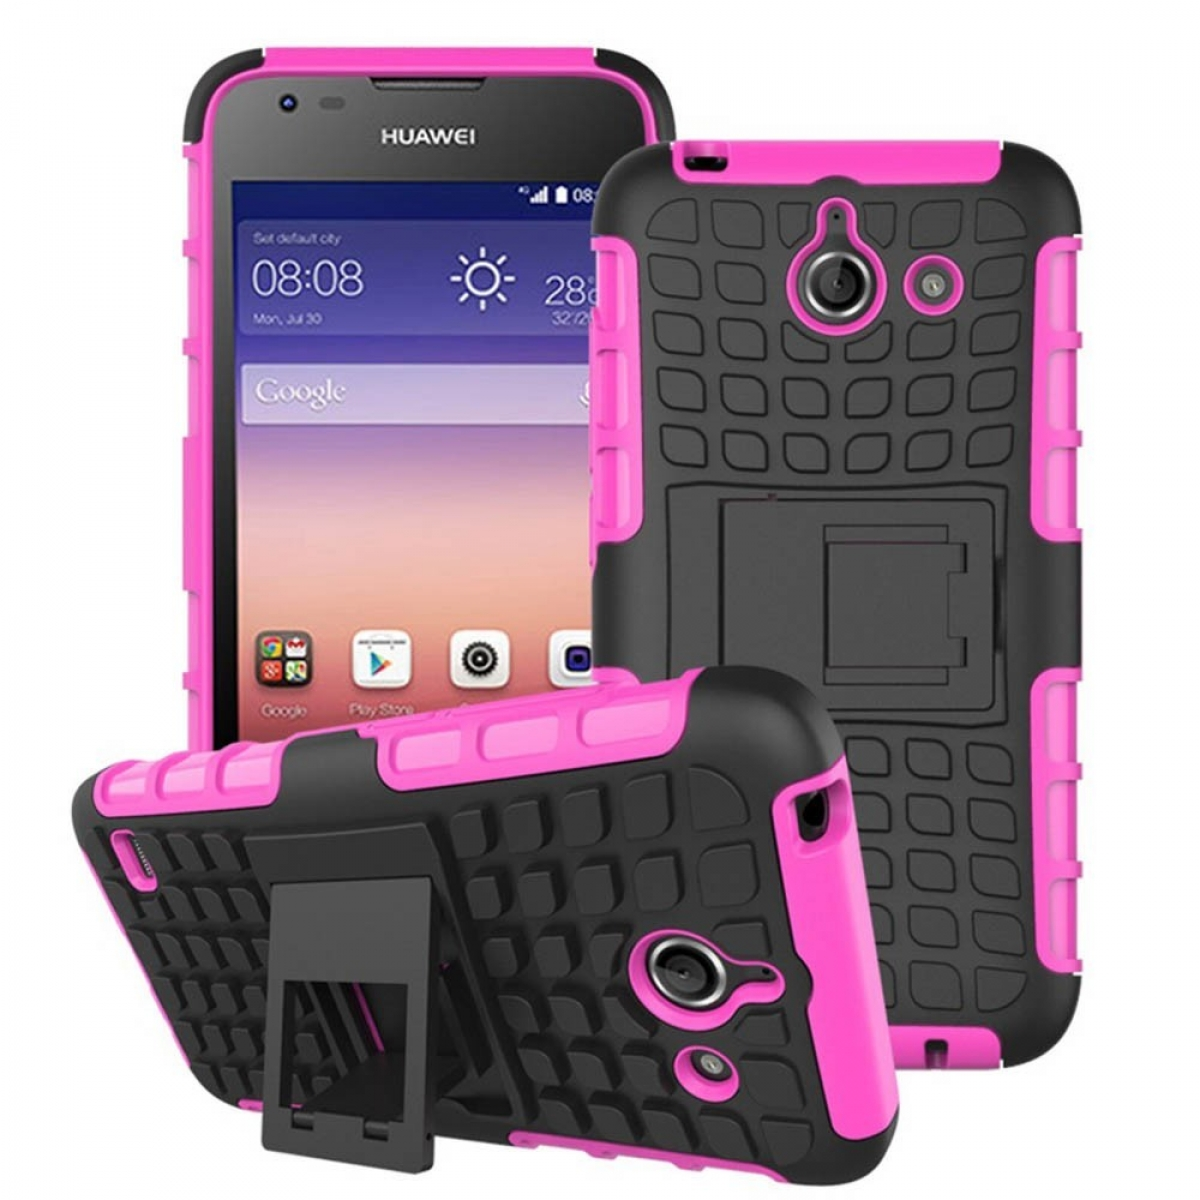 Backcover, Huawei, 2i1, CASEONLINE Y550, Ascend Pink